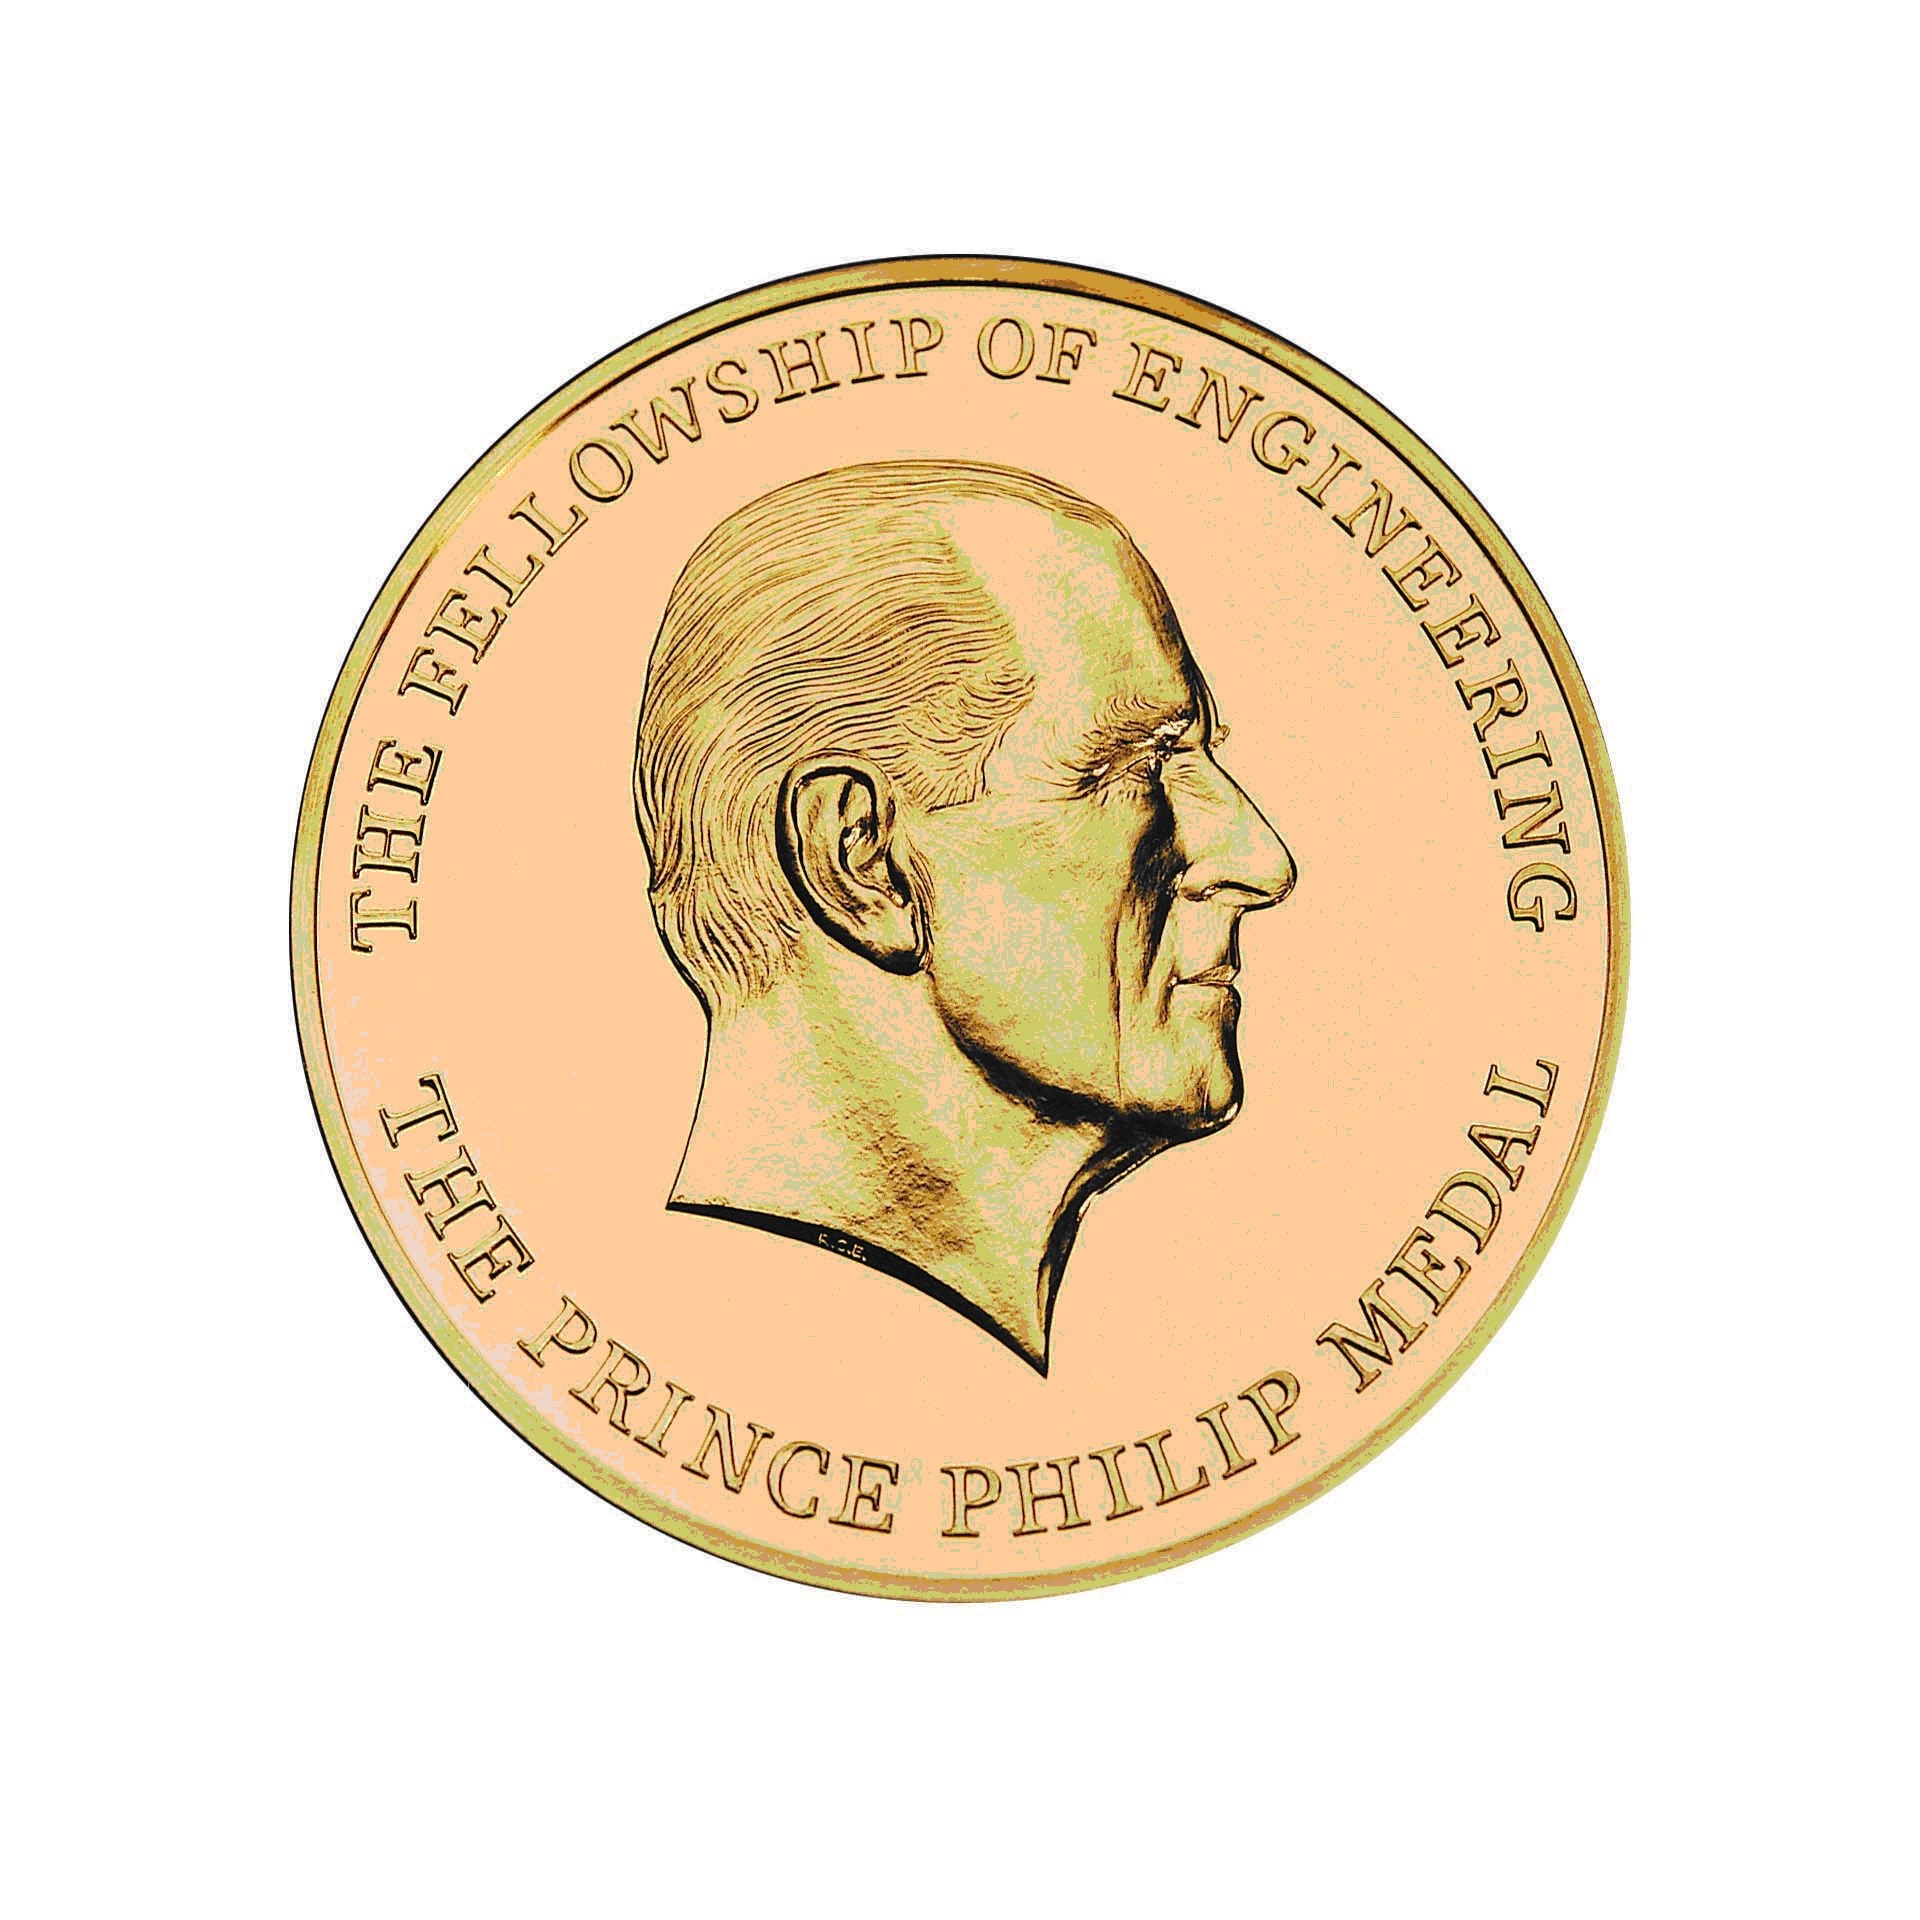 The Royal Academy of Engineering Prince Philip Medal